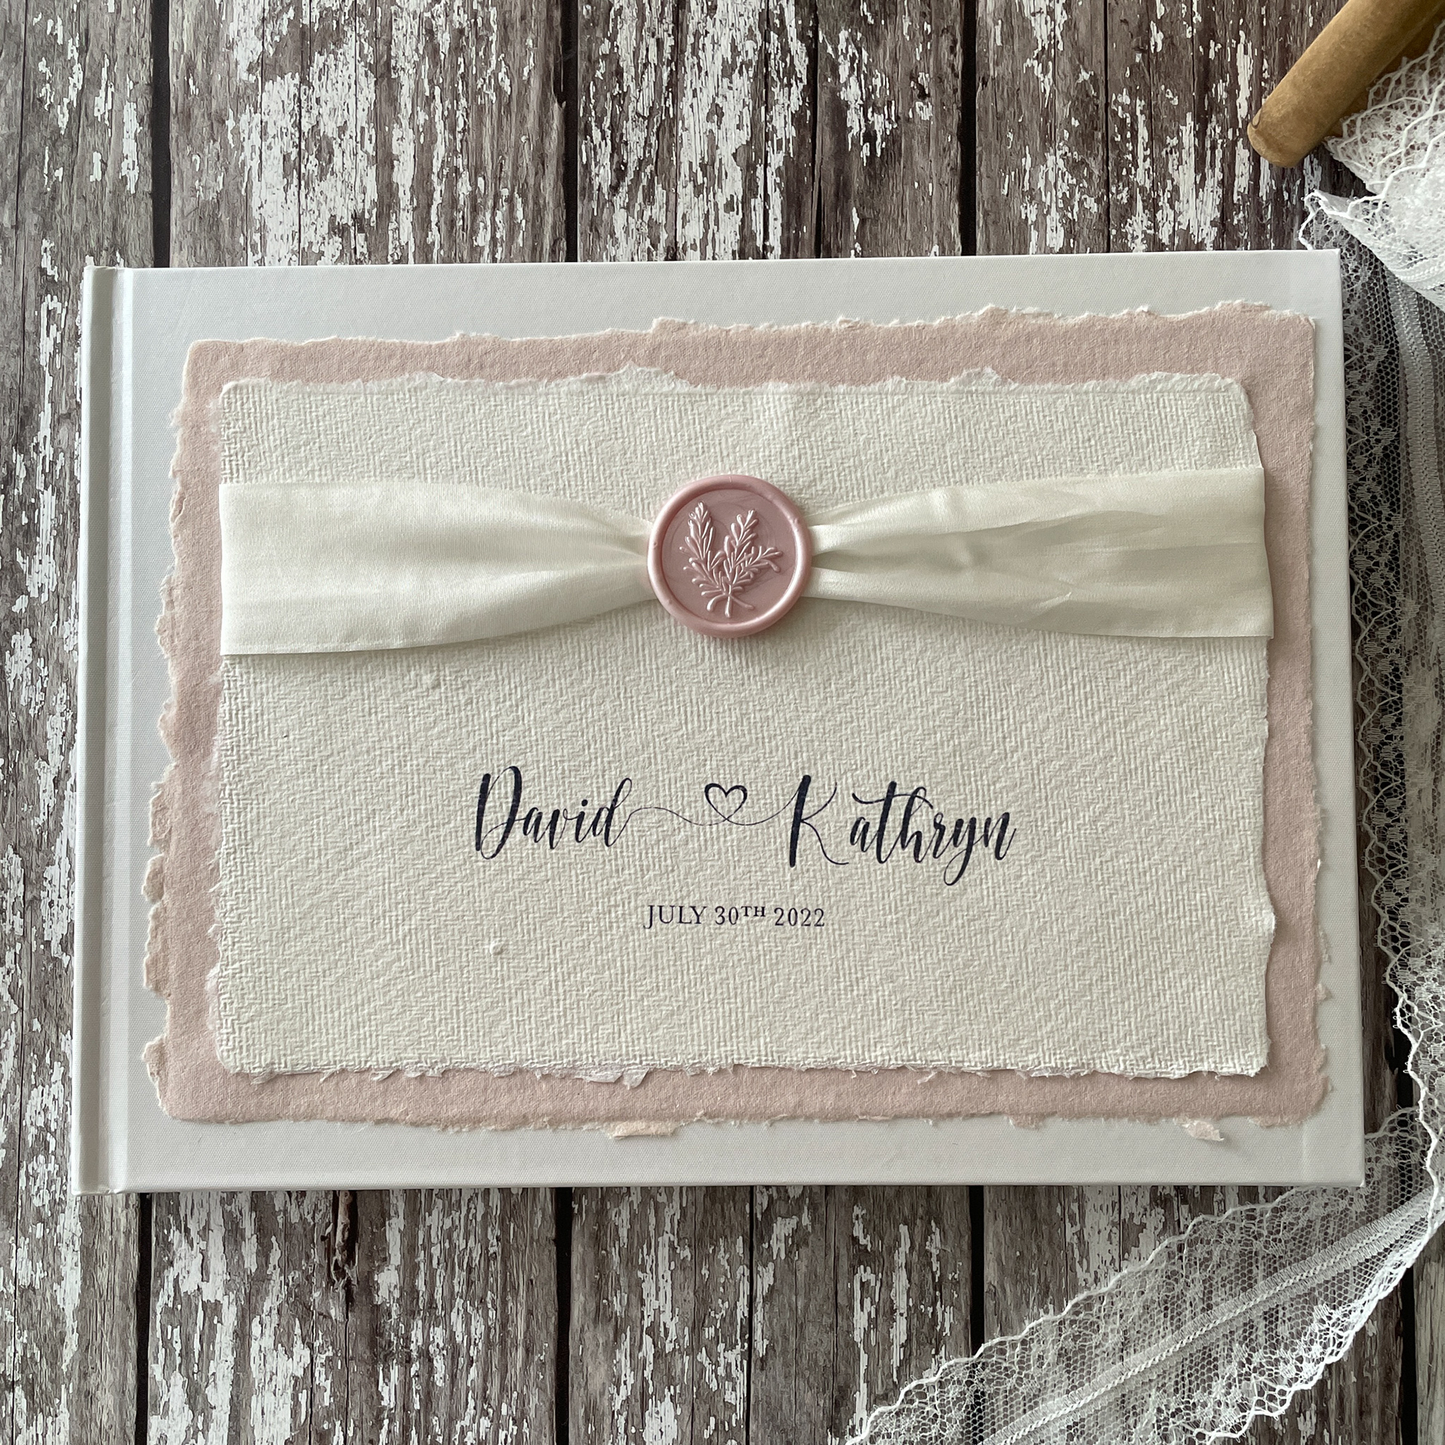 Blush pink and ivory guest book decorated with handmade paper, silk ribbon and wax seal.  Personalised wedding guest book